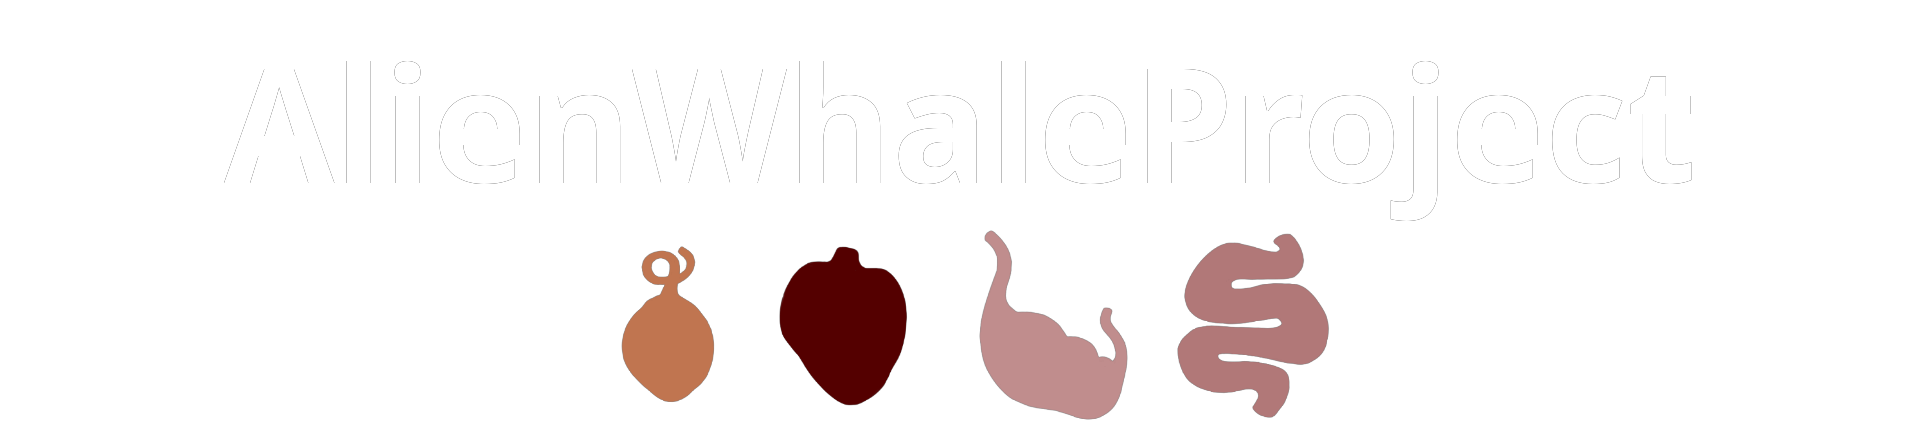 AlienWhaleProject